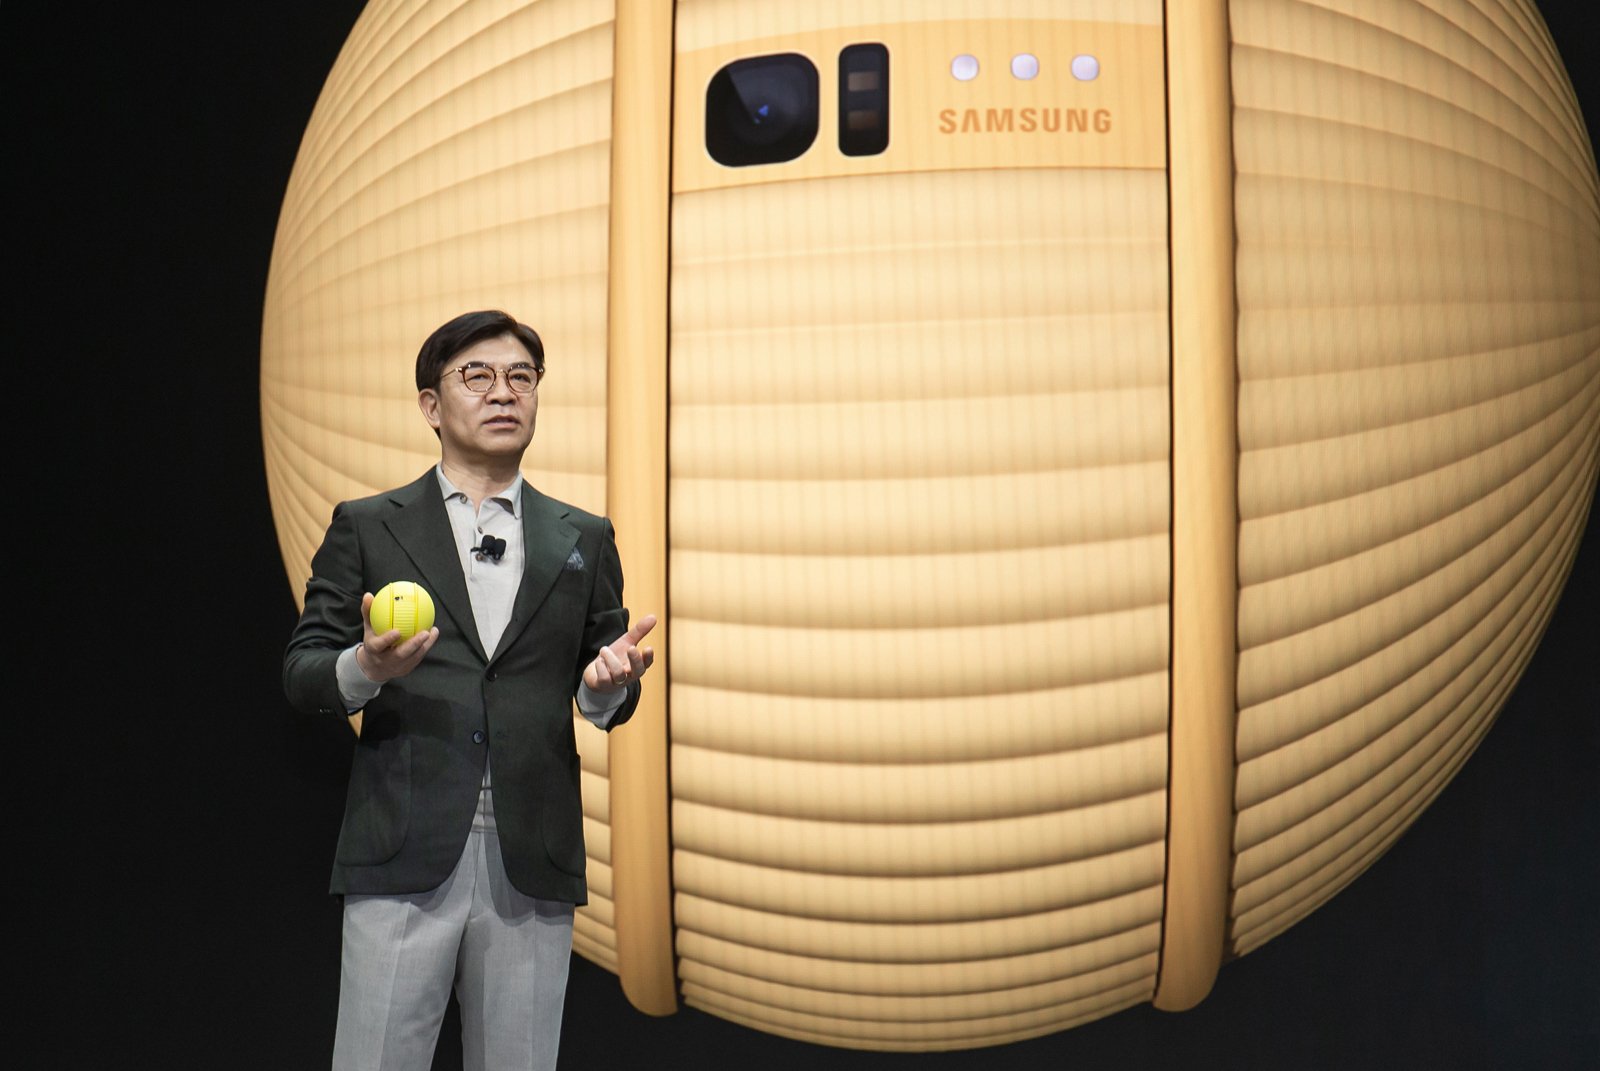 Samsung CEO and president Hyun-Suk Kim standing on a stage speaking at CES 2020 conference